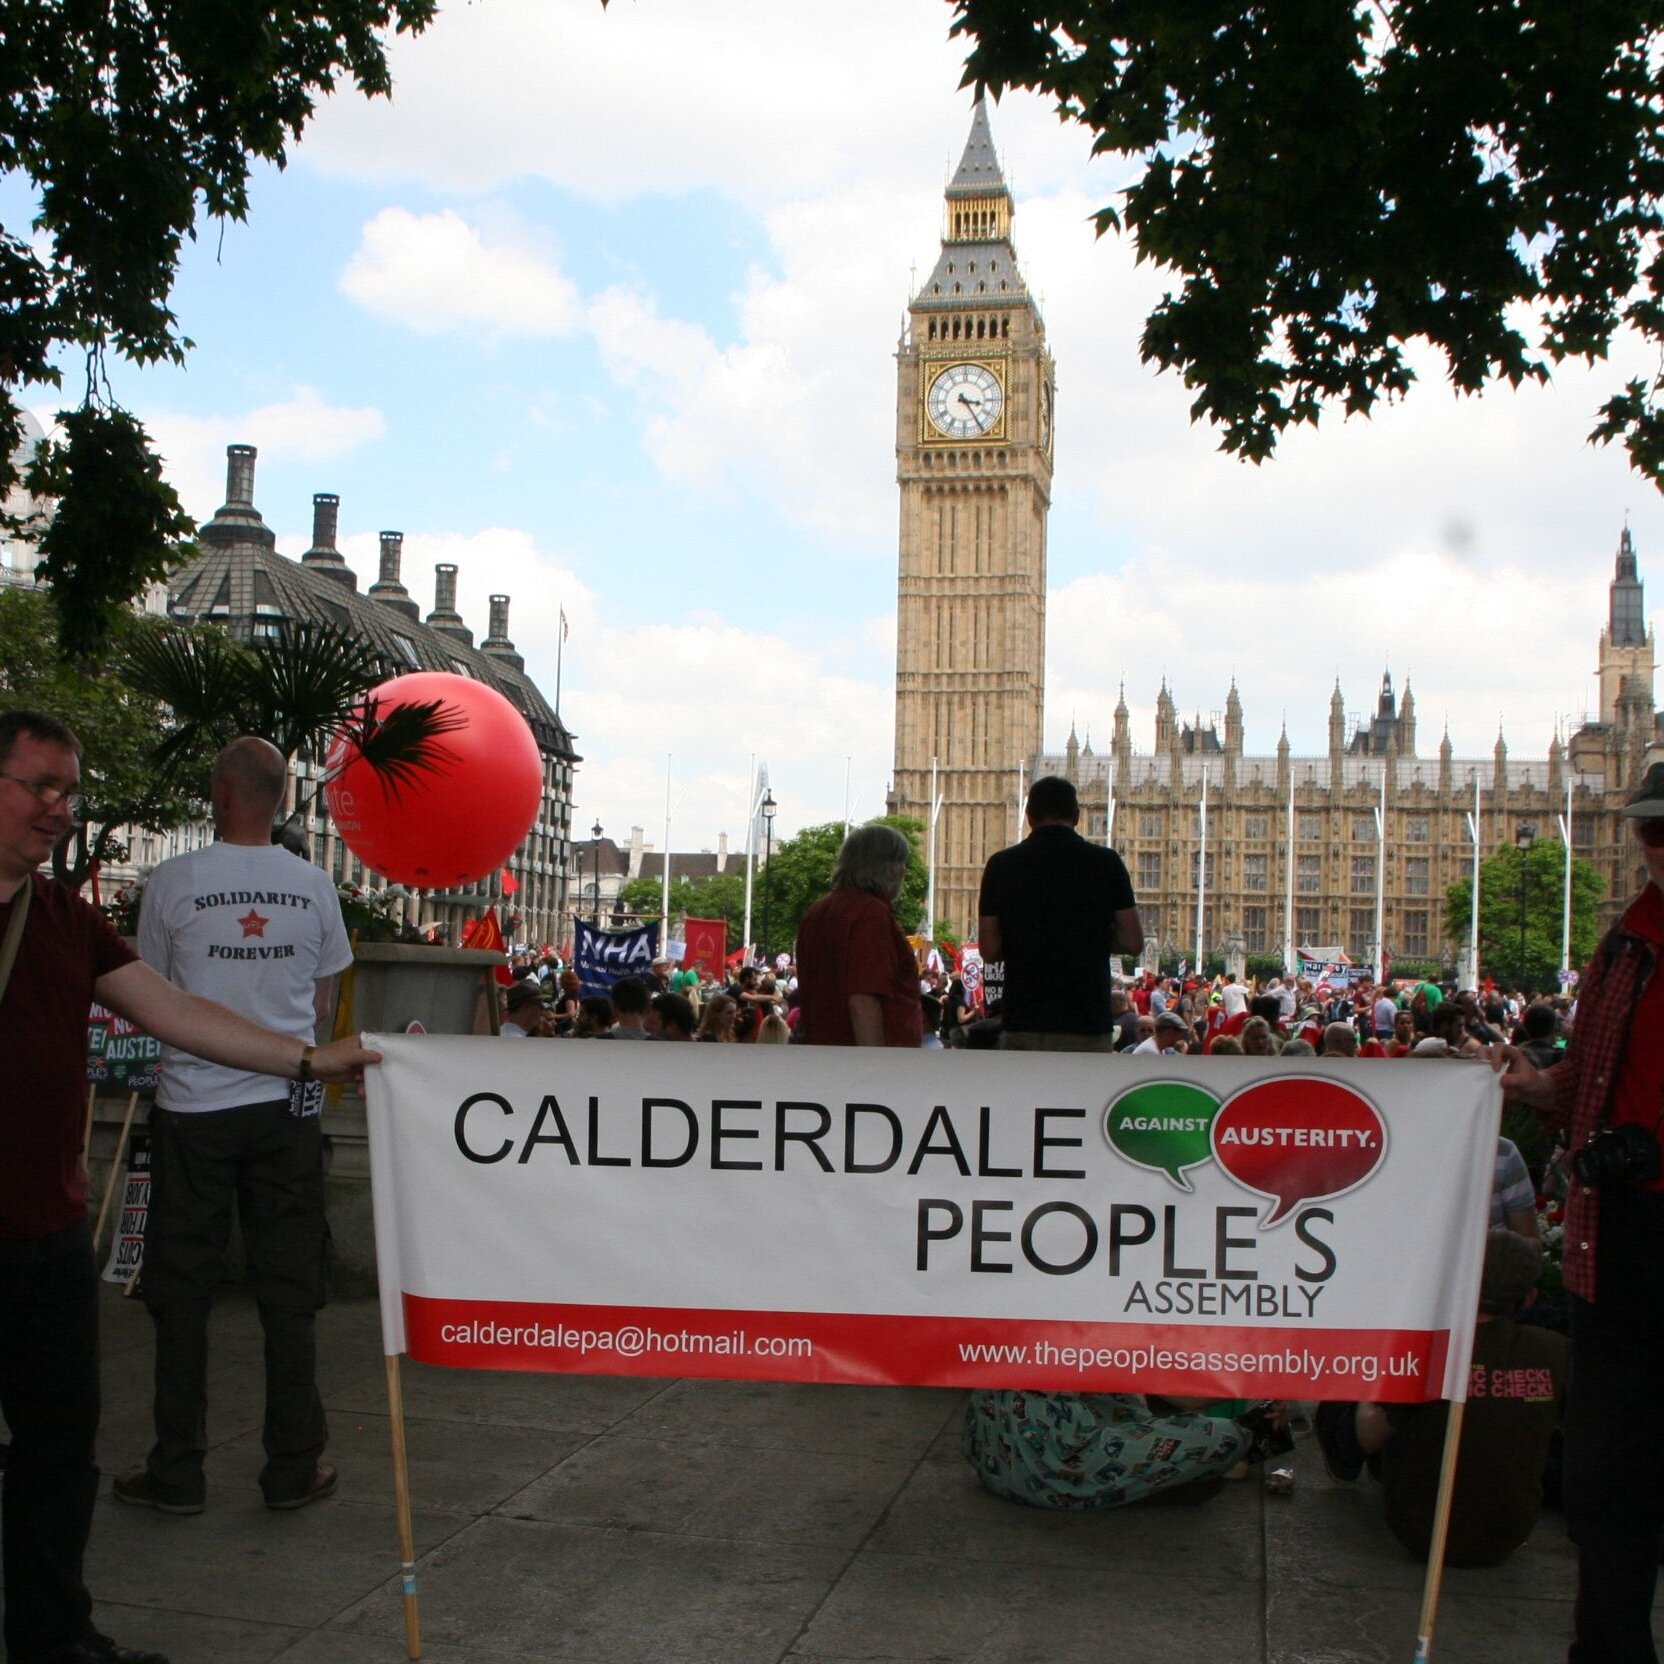 The Calderdale People's Assembly against Austerity is part of the national People's Assembly against Austerity.